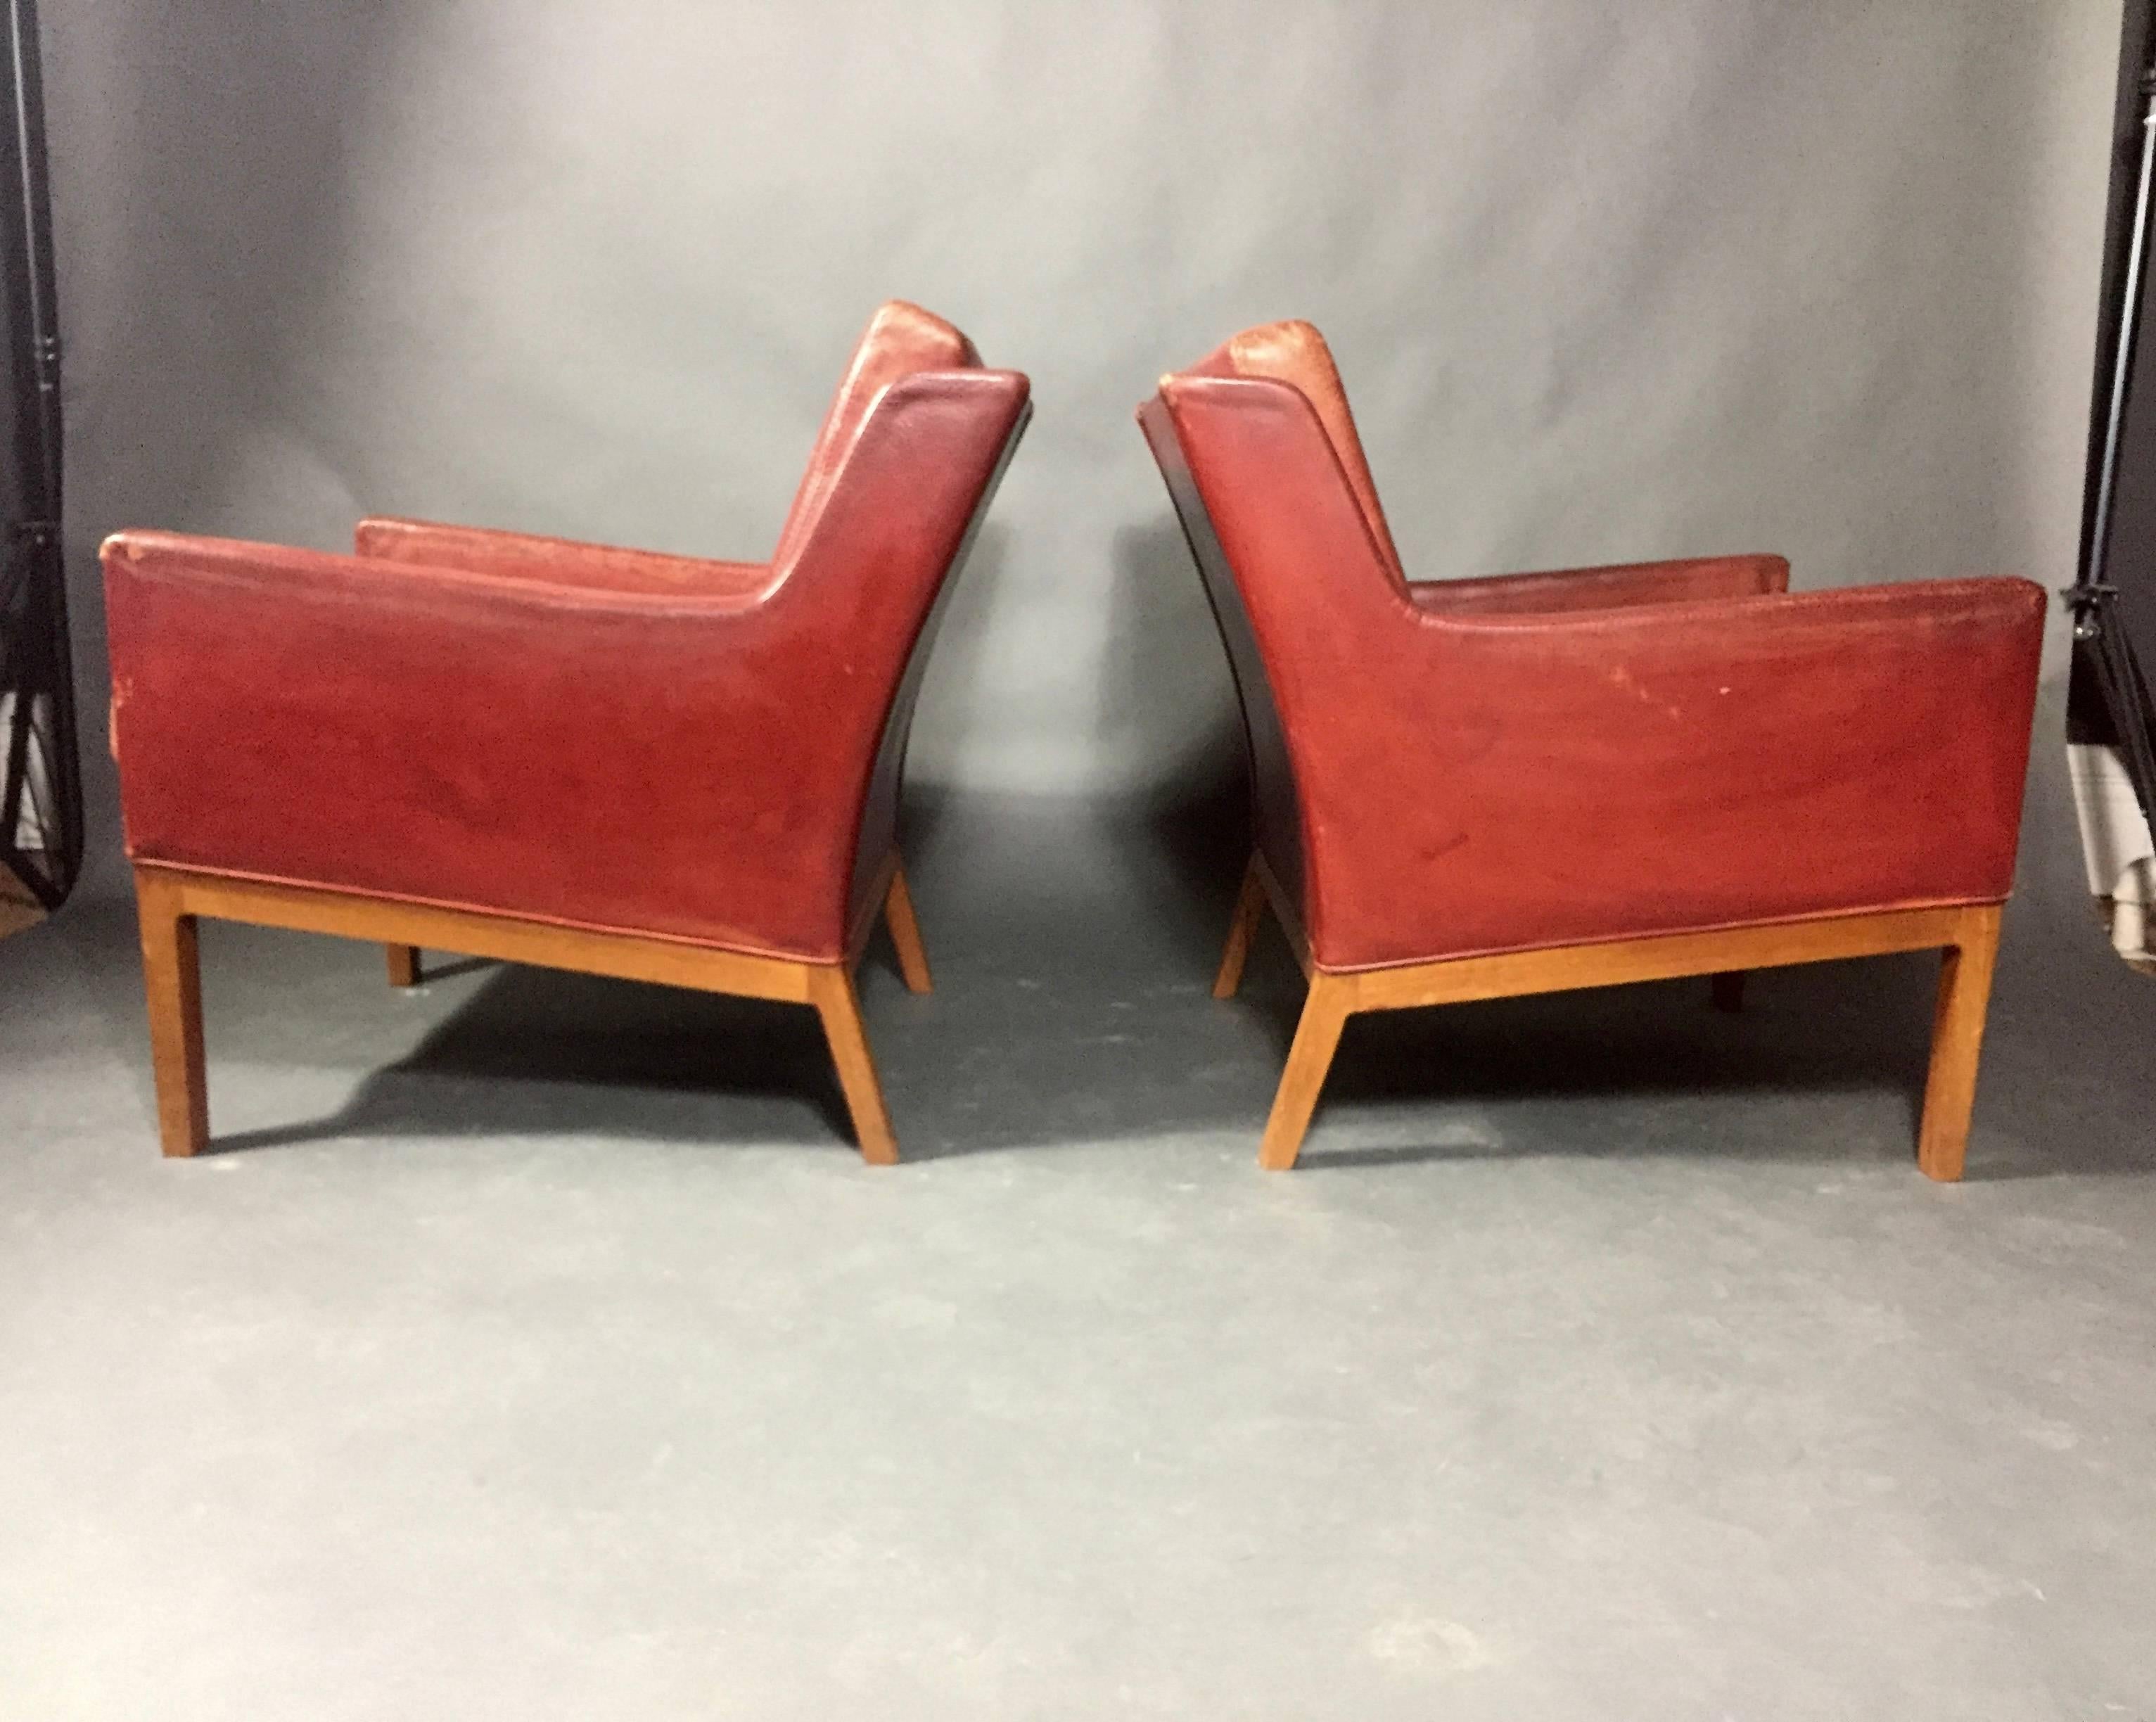 Mid-20th Century Danish 1960s Pair of Red Leather Lounge Chairs